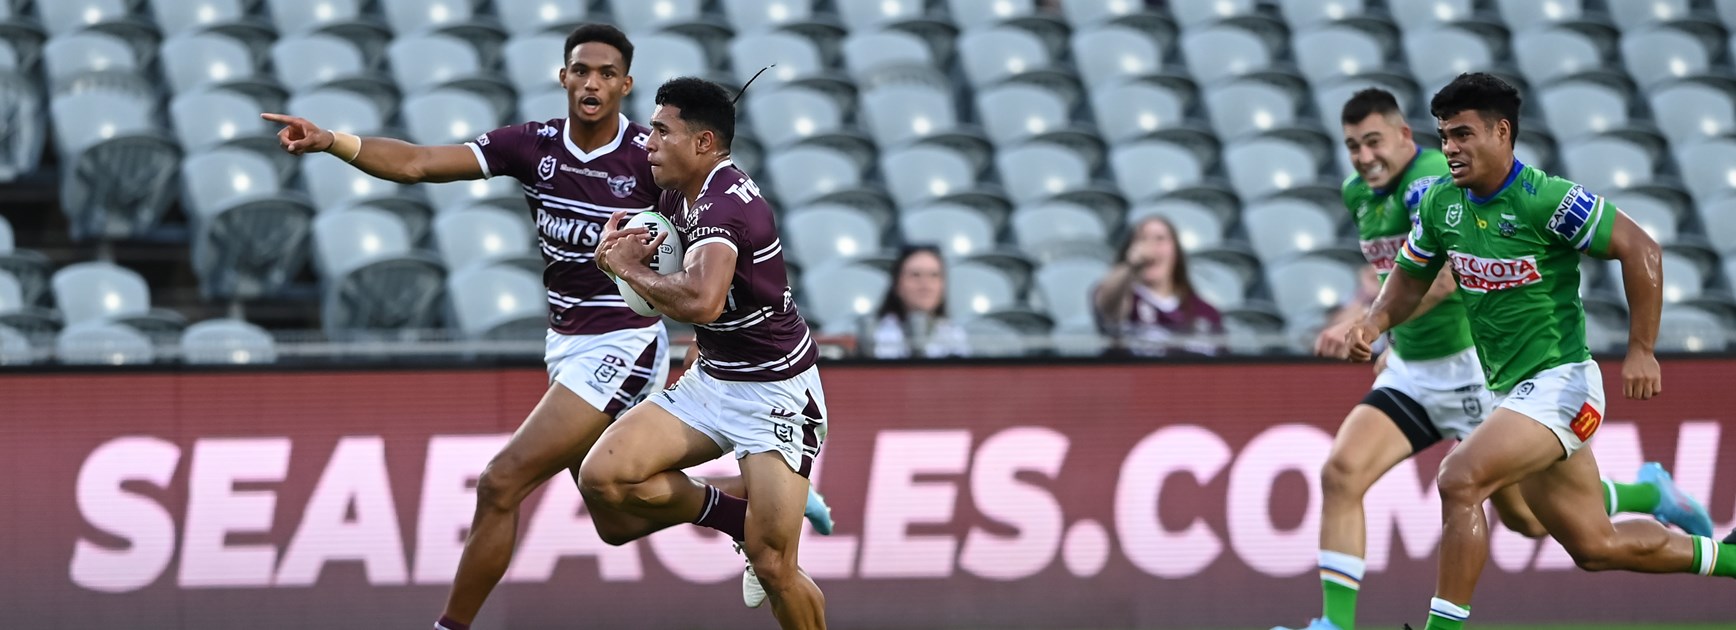 Sea Eagles to play in Pre-Season Challenge matches